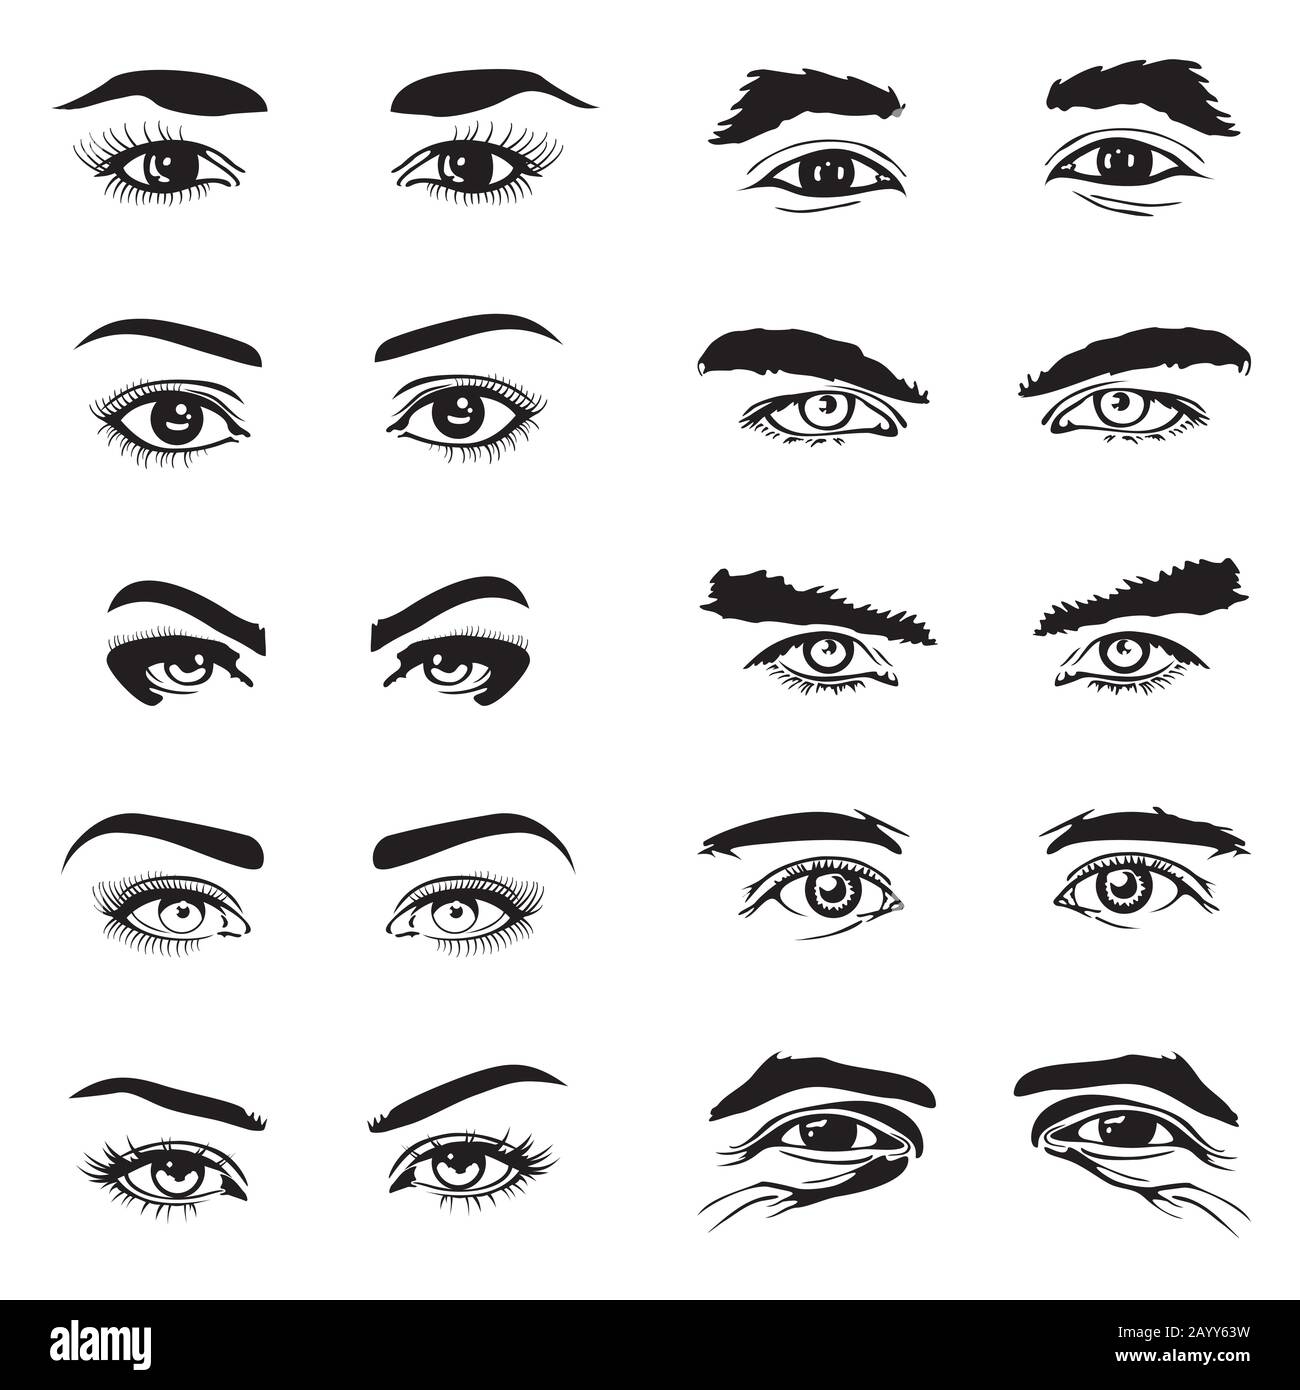 Male and female eyes and eyebrows vector elements. Human eyeball and look illustration Stock Vector